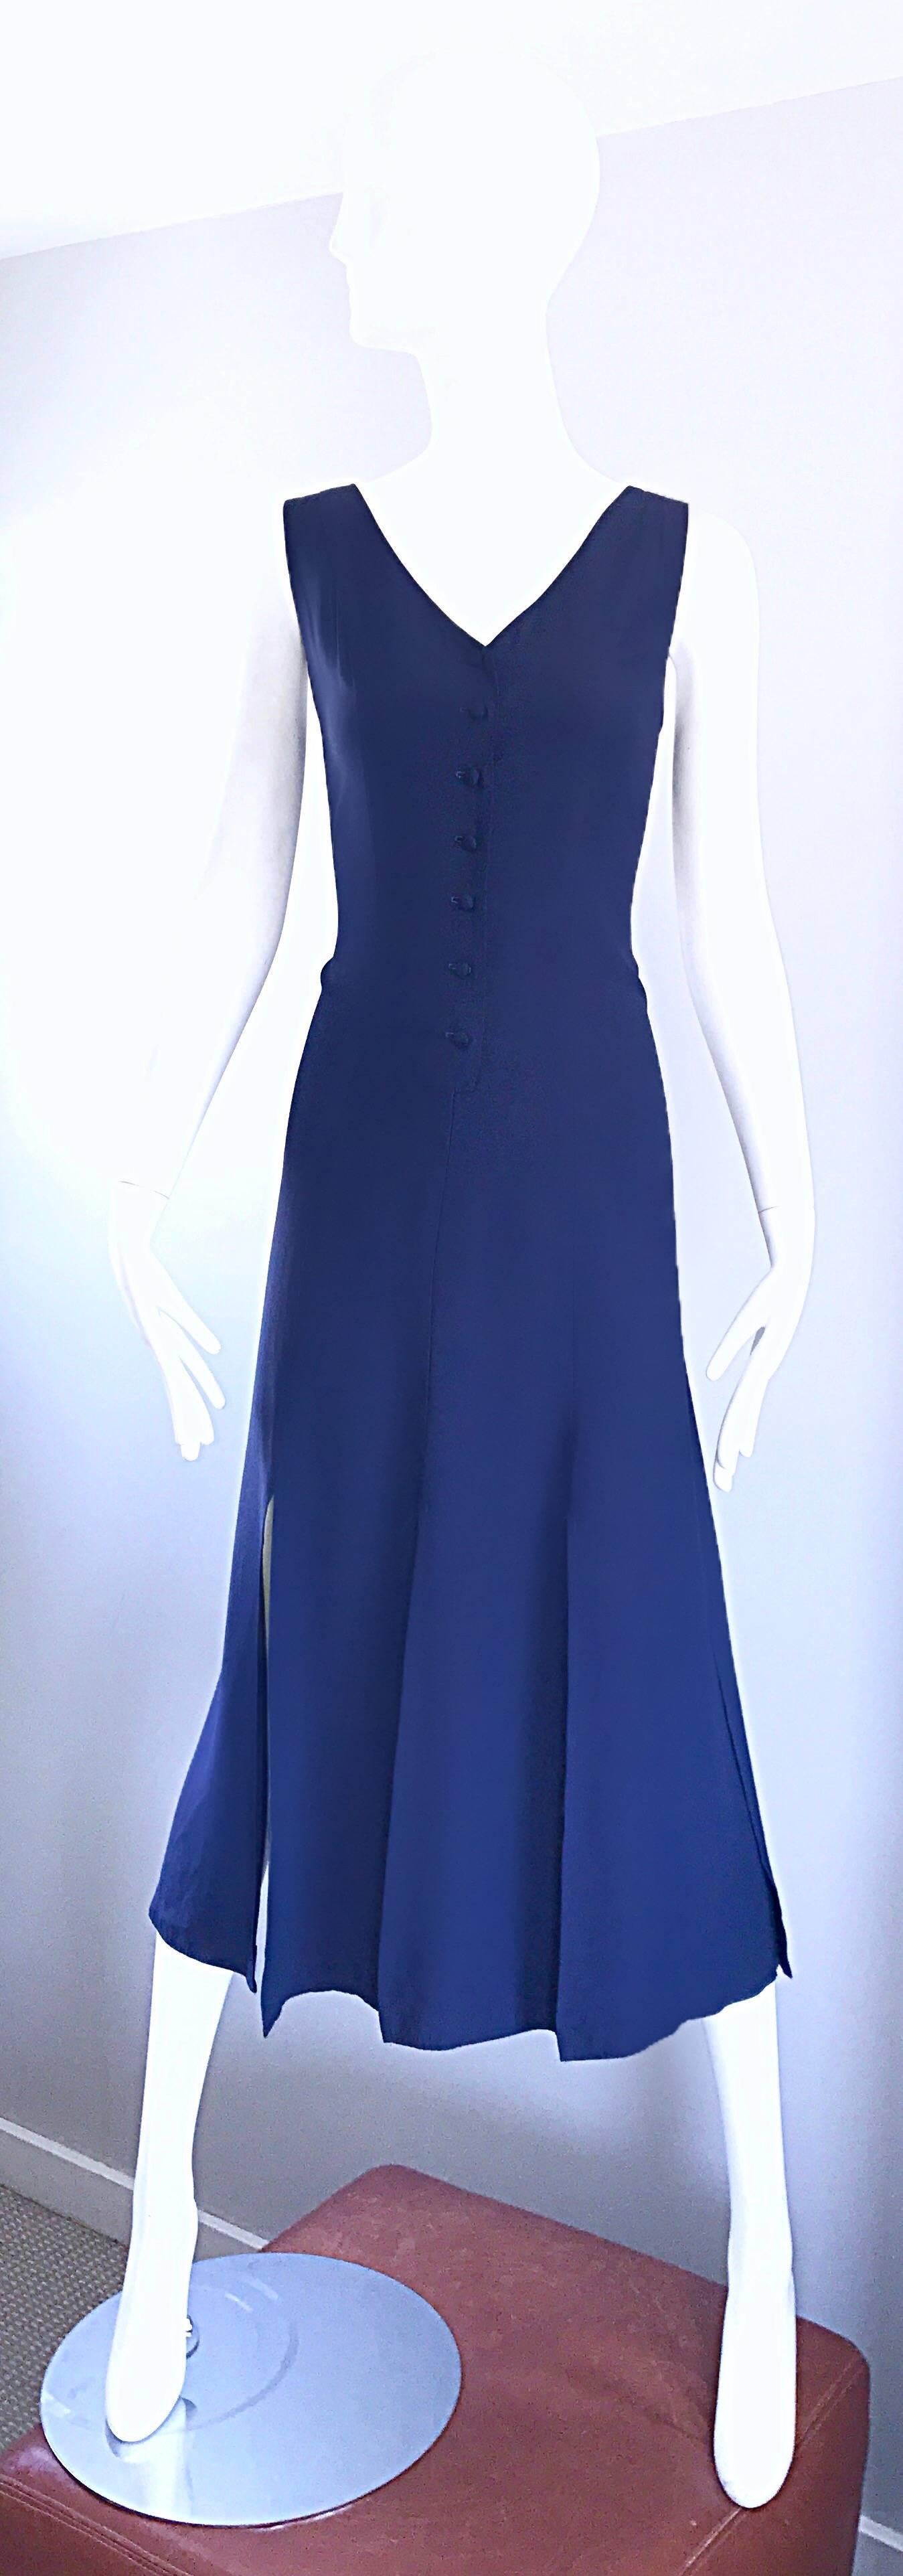 Rare and exceptional vintage GEOFFREY BEENE navy blue rayon car wash hem dress! Fitted bodice features functional black buttons up the front, which leads to a free flowing skirt with split panels. Looks amazing when worn, especially on the dance